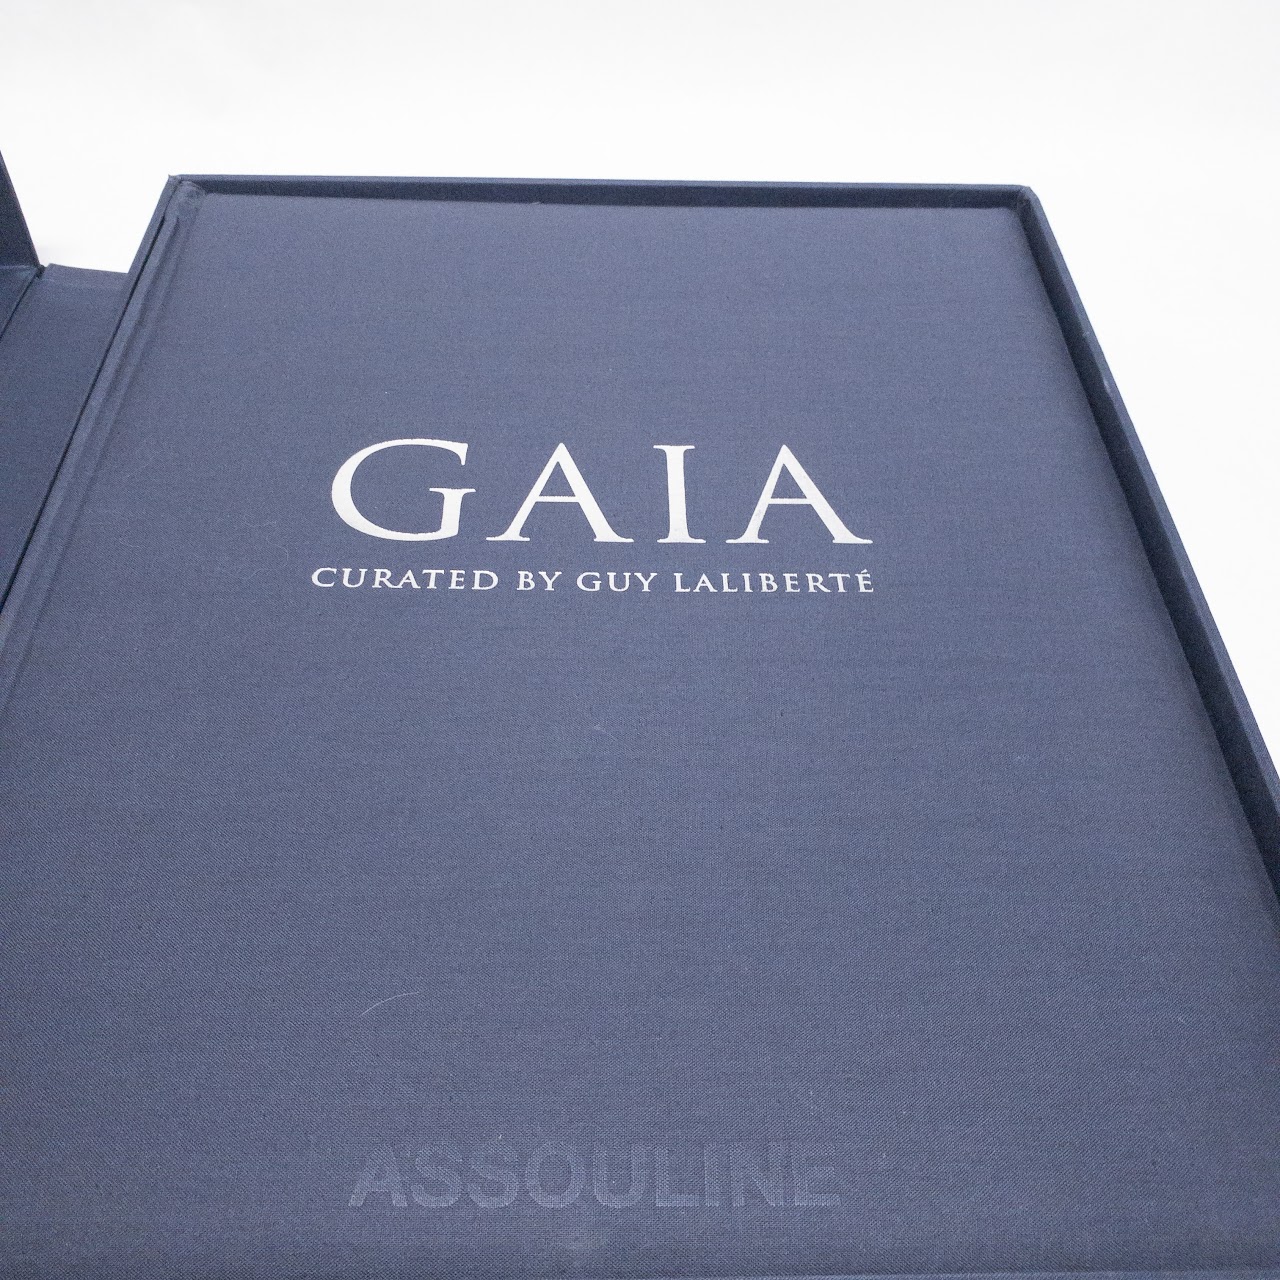 Gaia: Ultimate Collection Book